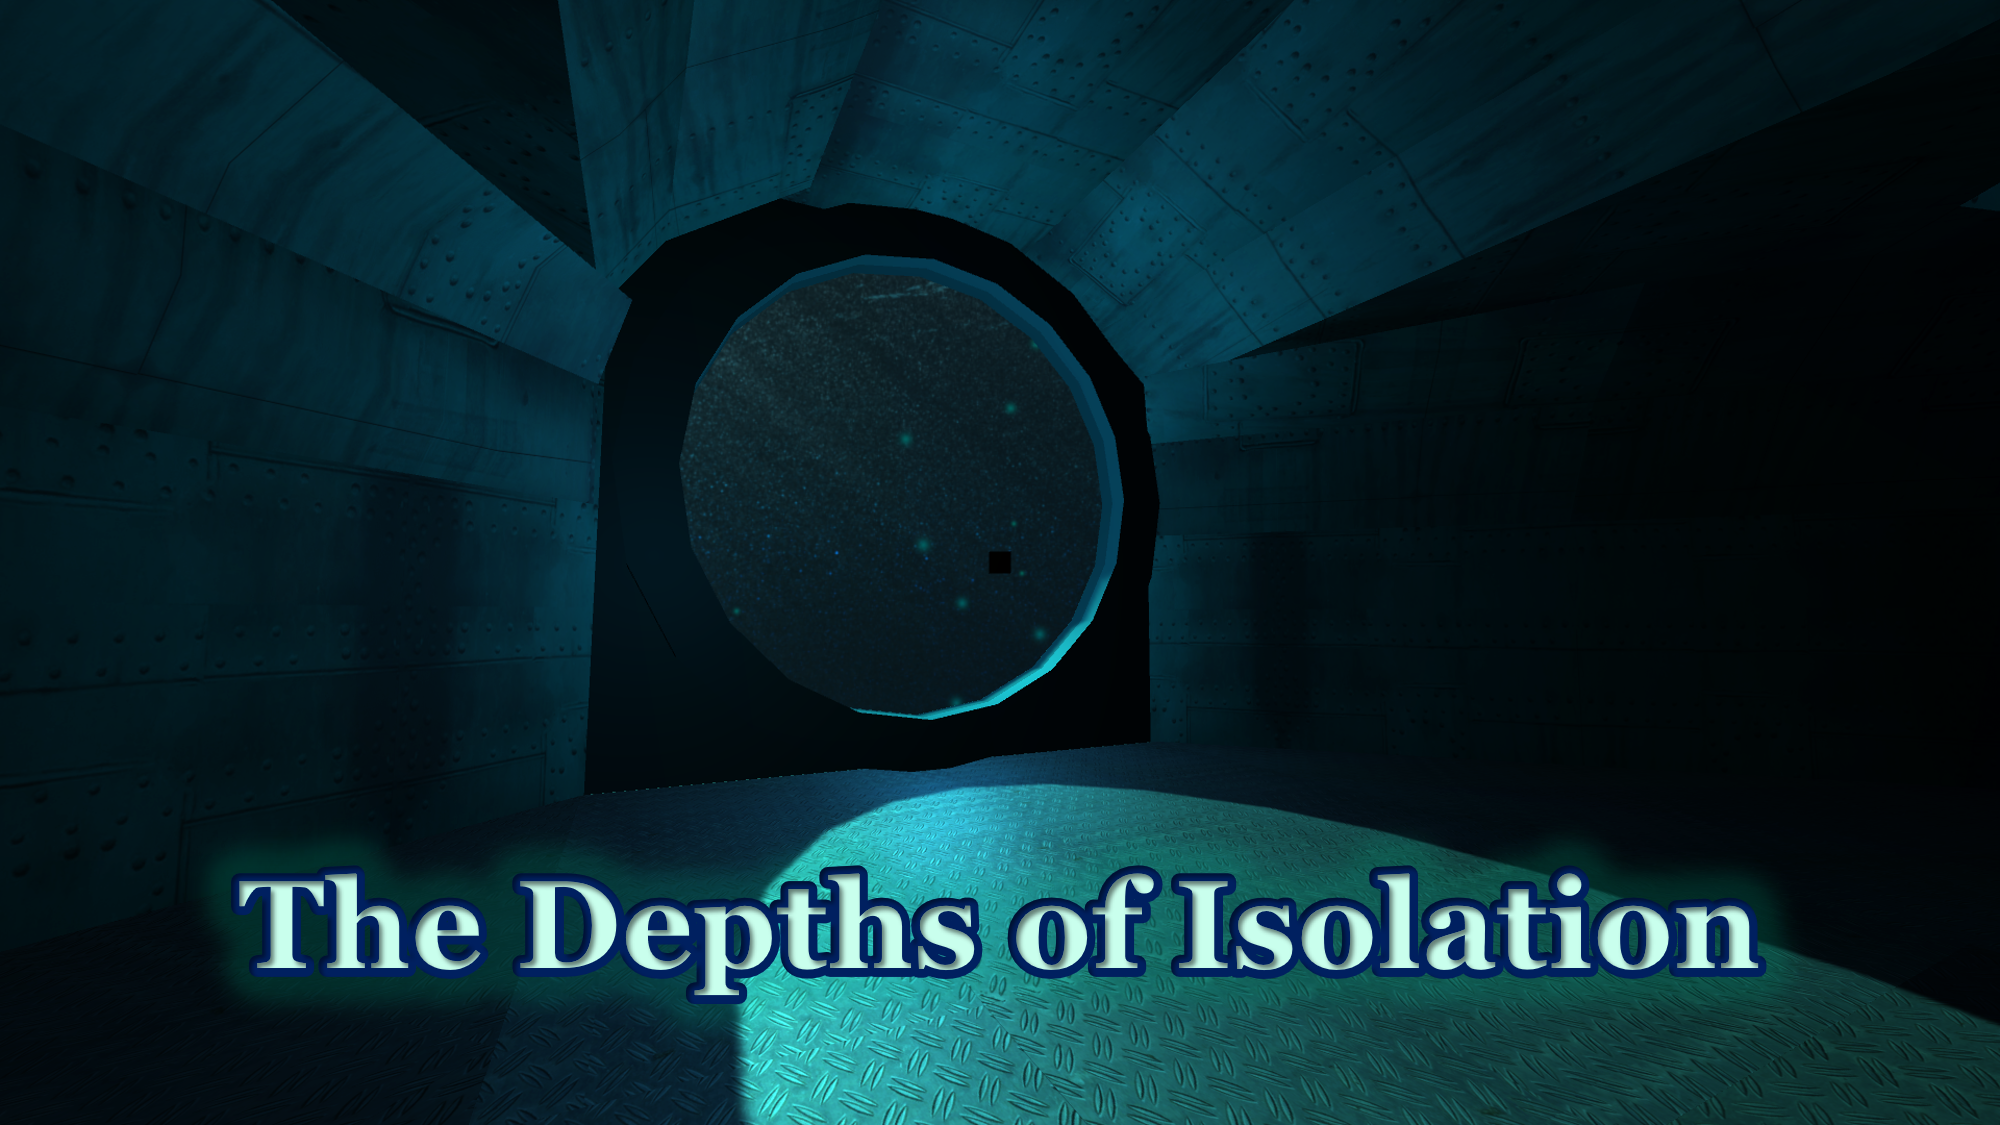 The Depths of Isolation